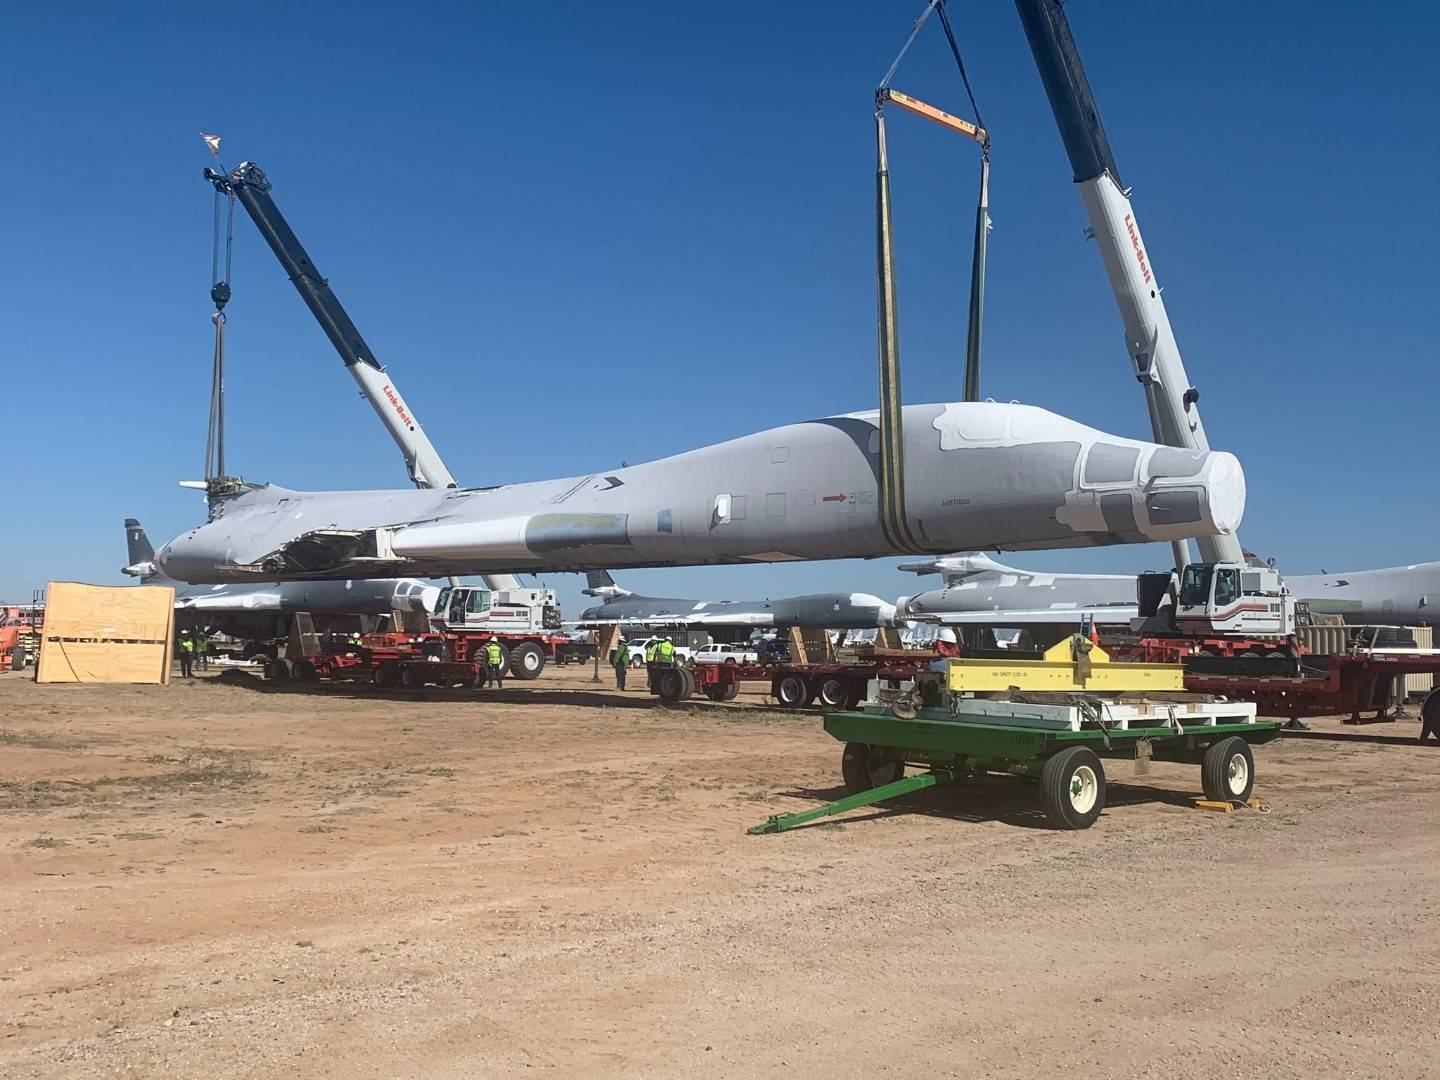 B-1B Lancer tail number 85-0092 is lifted and placed on flatbed trailers for the 1,000-mile journey to Wichita, Kan., April 24, 2020. The National Institute for Aviation Research at Wichita State University will scan every part of the aircraft to create a digital twin that can be used for research. (U.S. Air Force photo by Daryl Mayer)